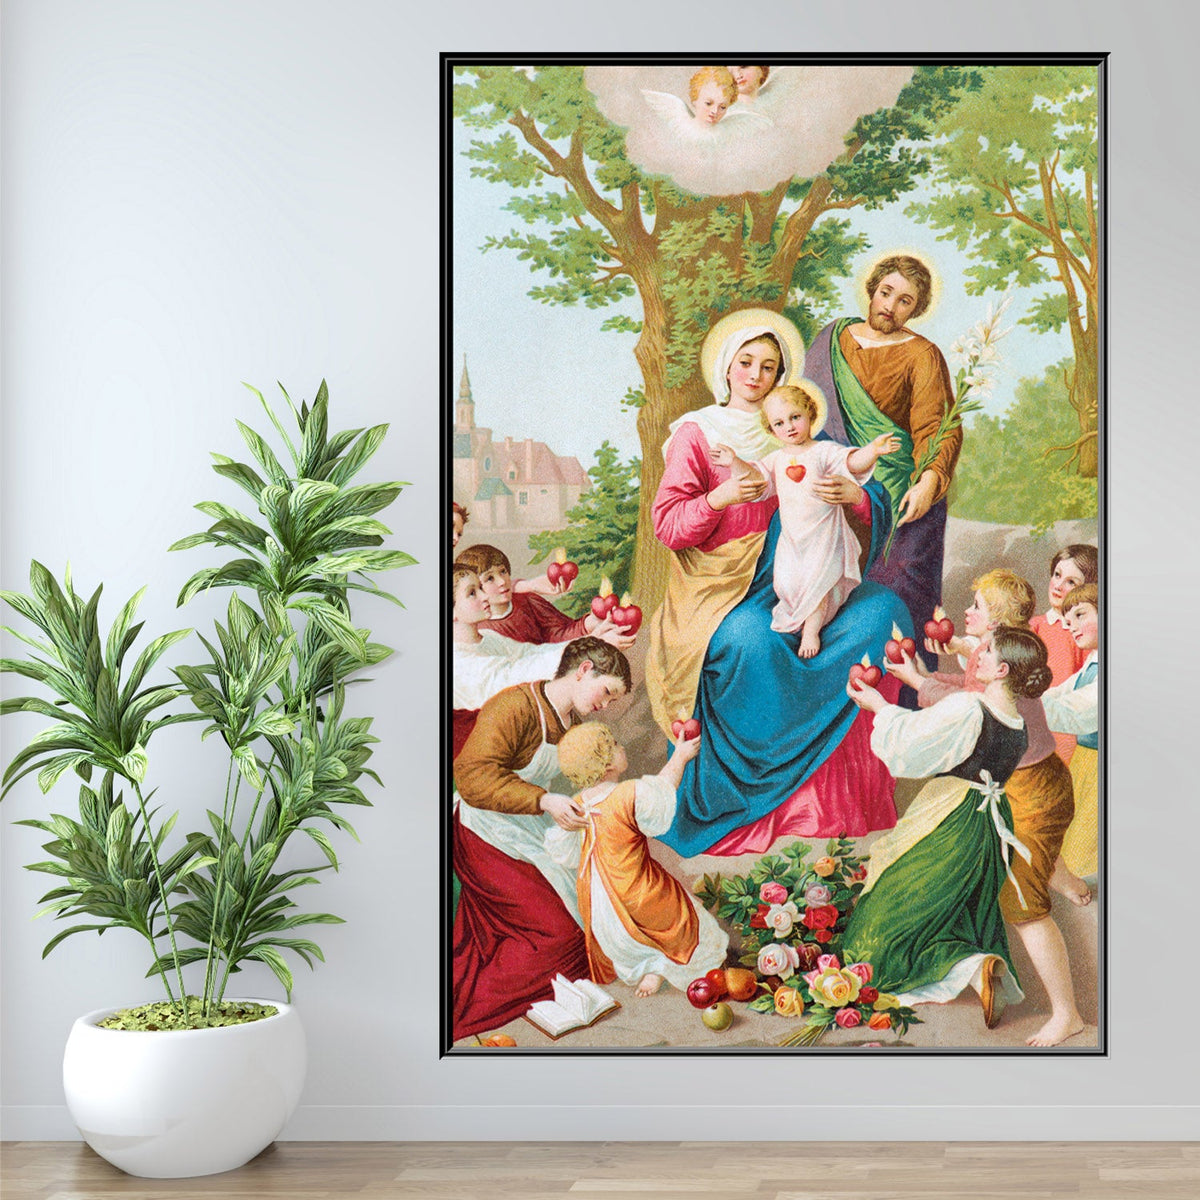 https://cdn.shopify.com/s/files/1/0387/9986/8044/products/TheBlessedHolyFamilyCanvasArtprintFloatingFrame-2.jpg